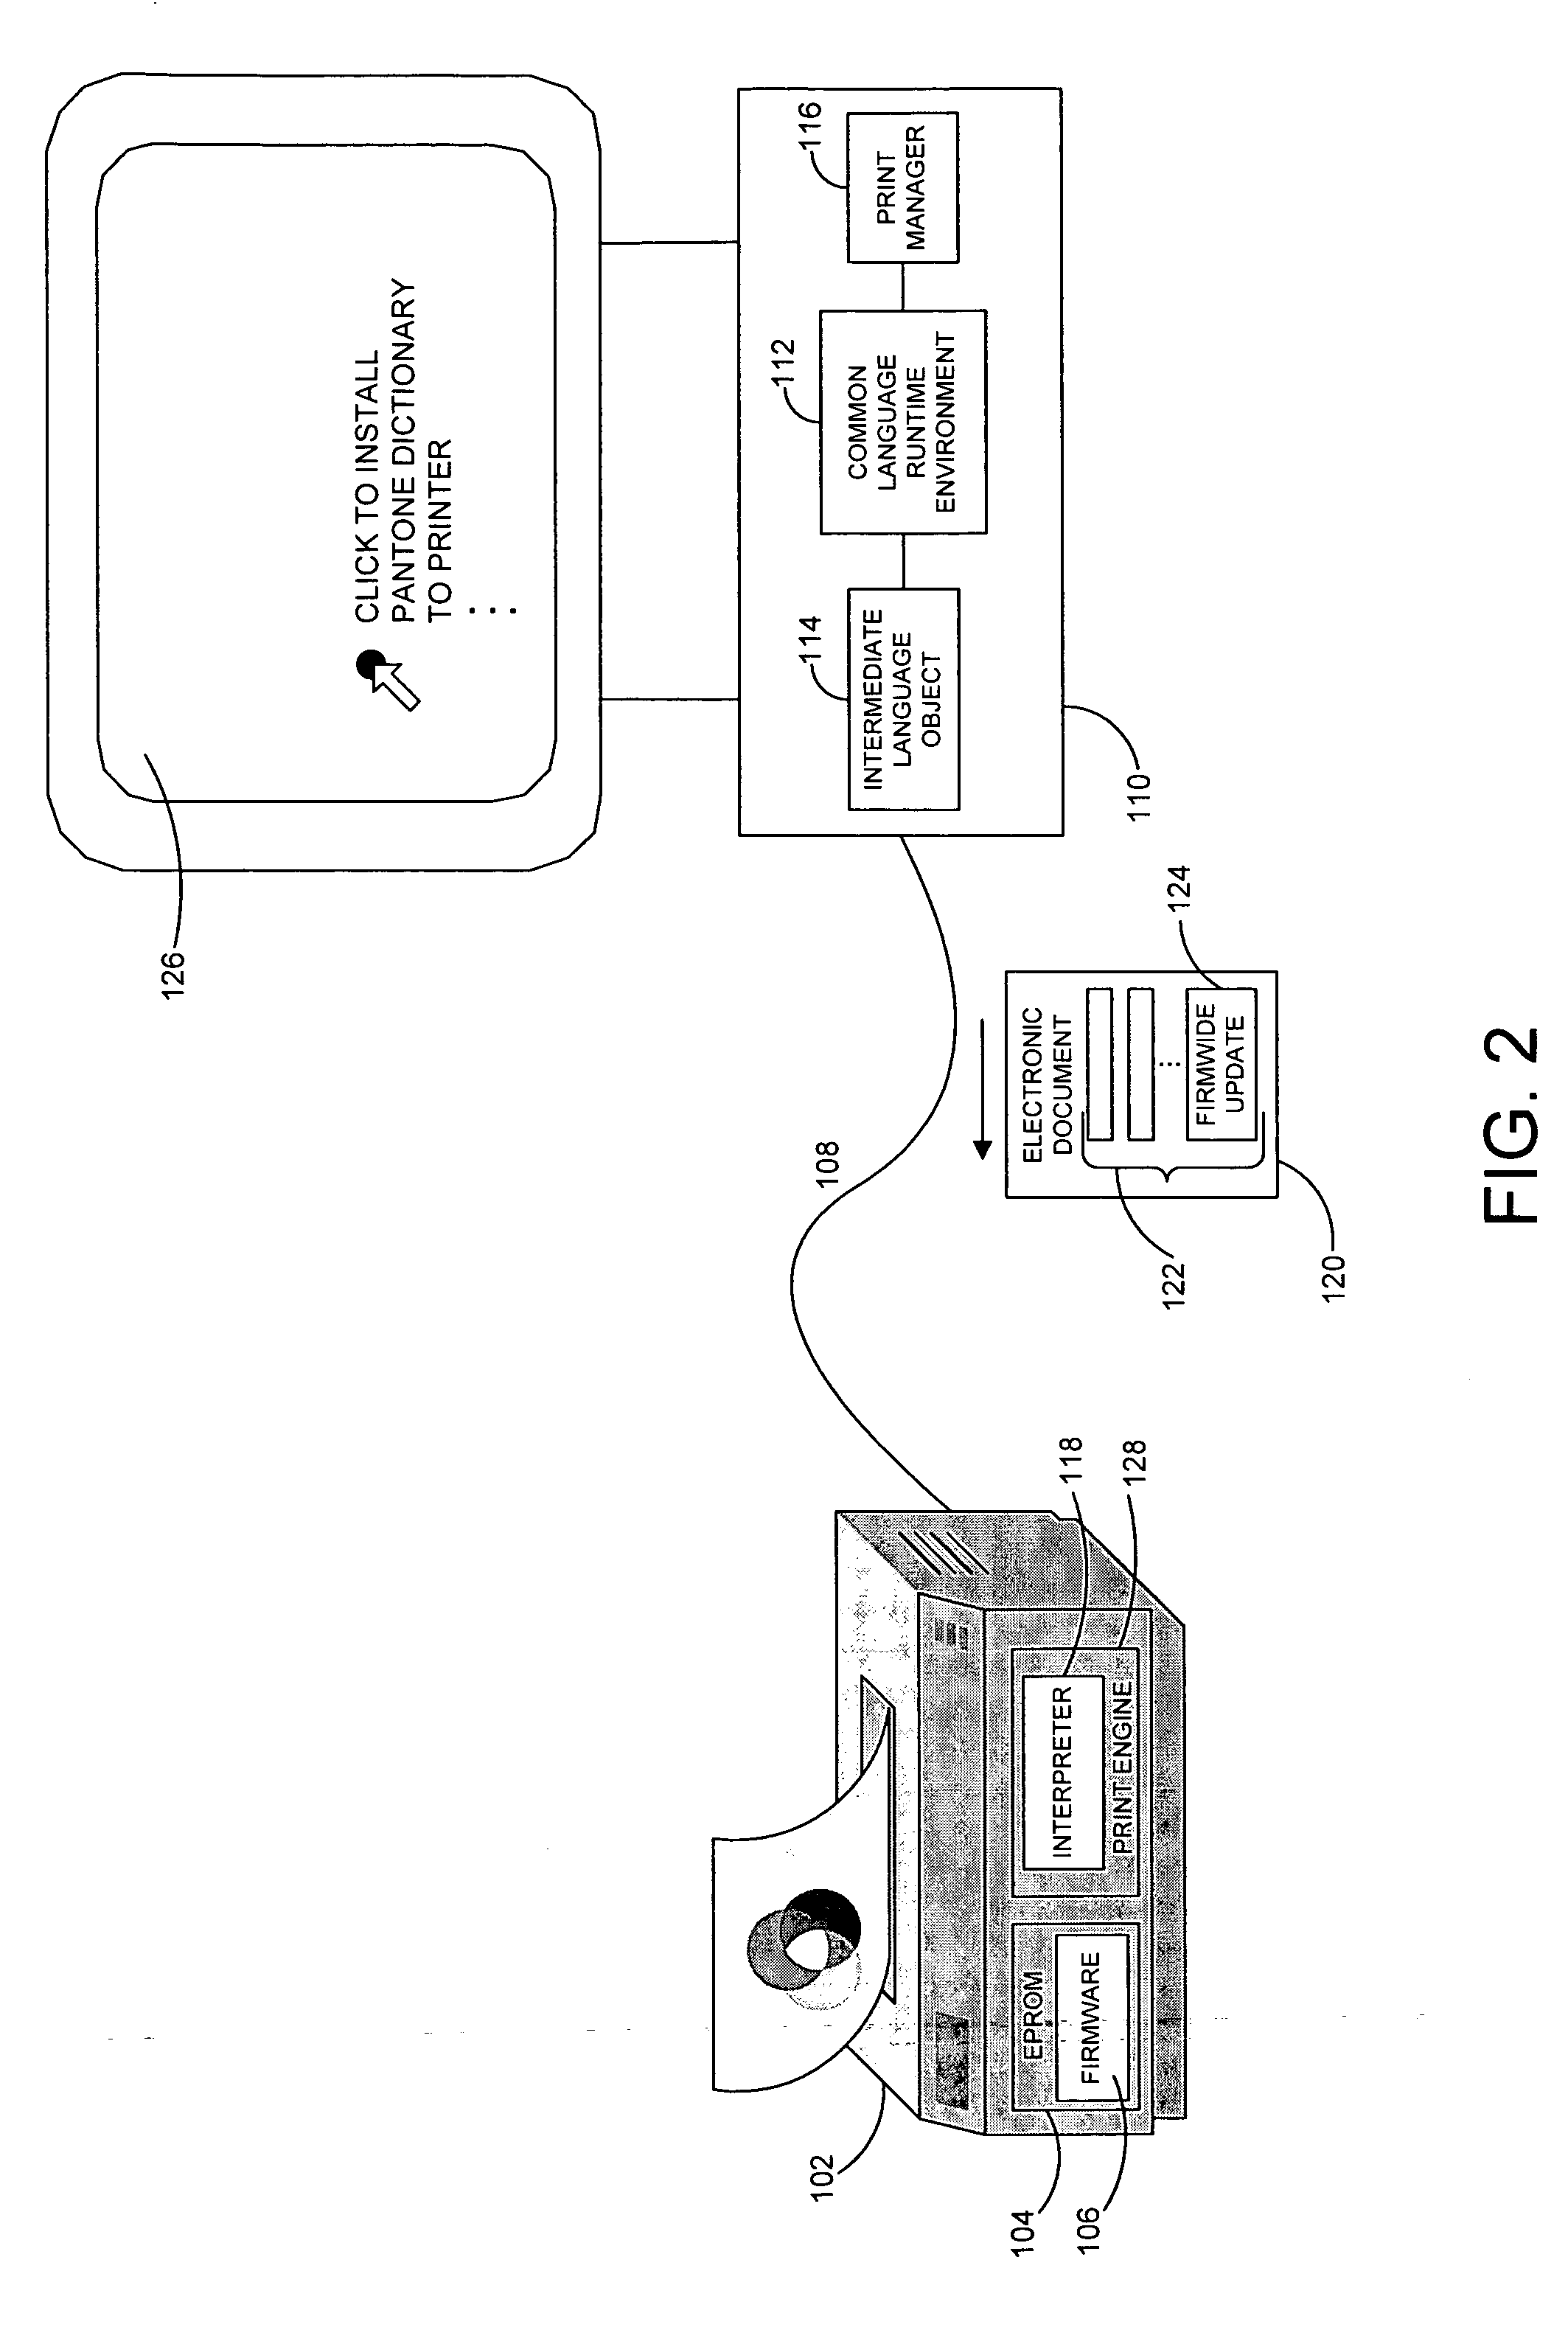 System and method for generating embedded resource updates for output device